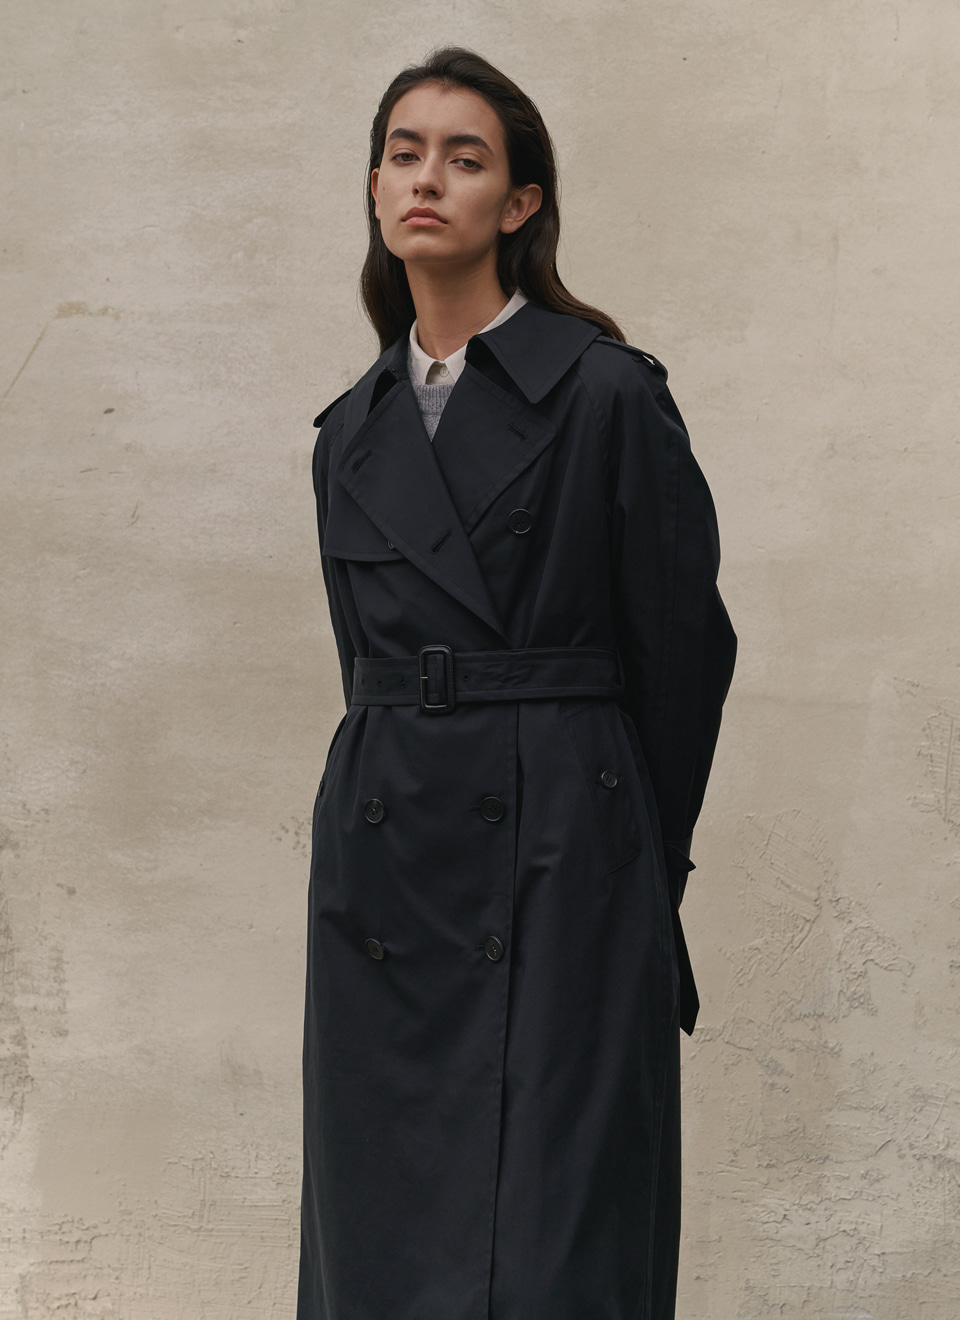 20 A/W LONG TRENCH COAT BLACK